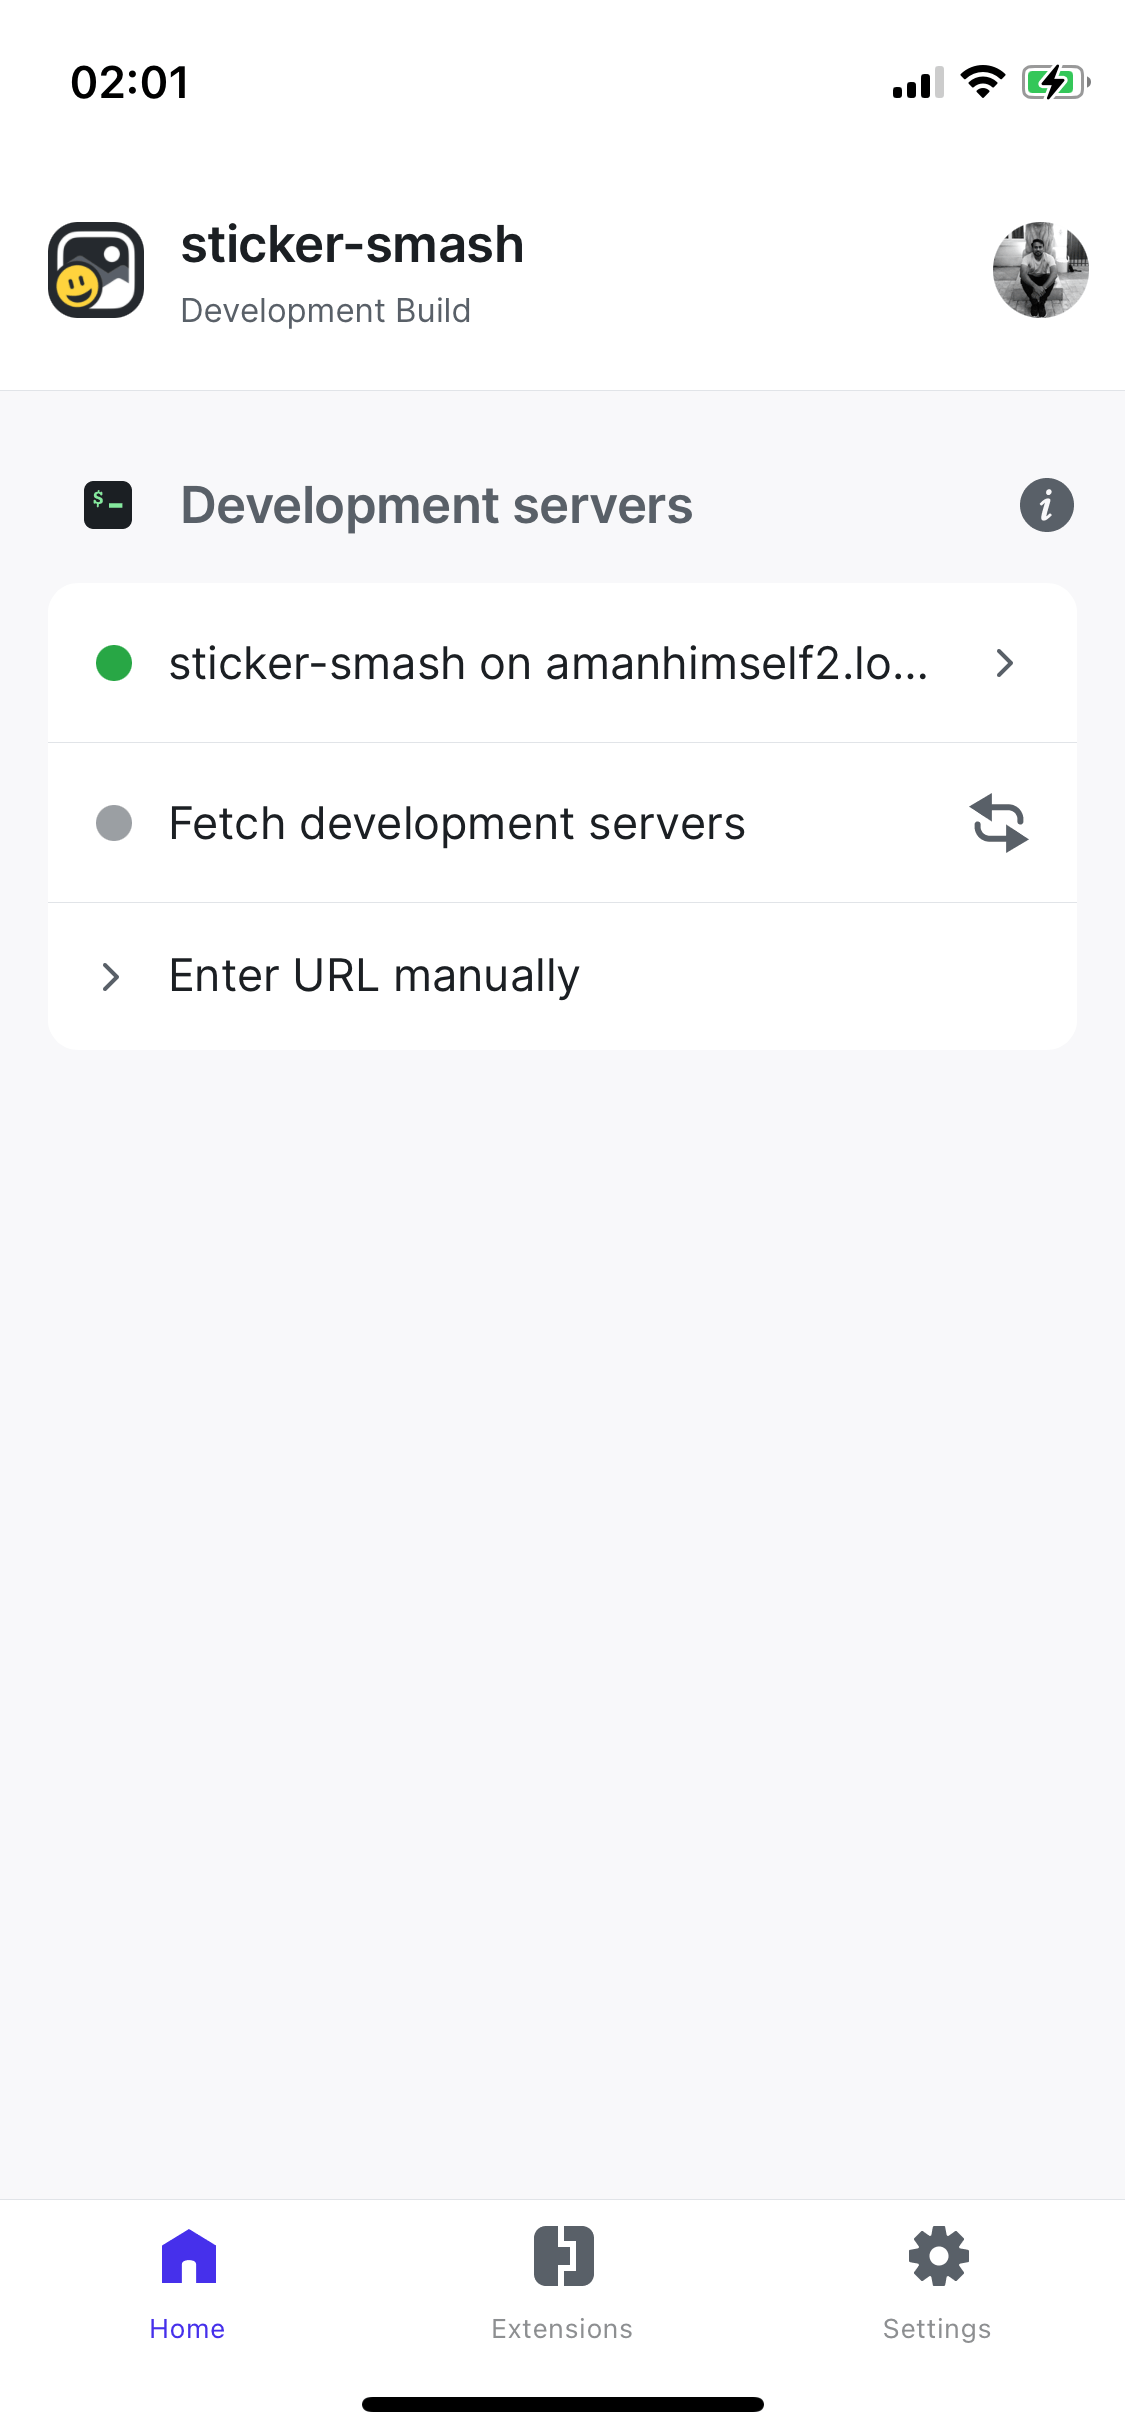 Fetching development servers to connect